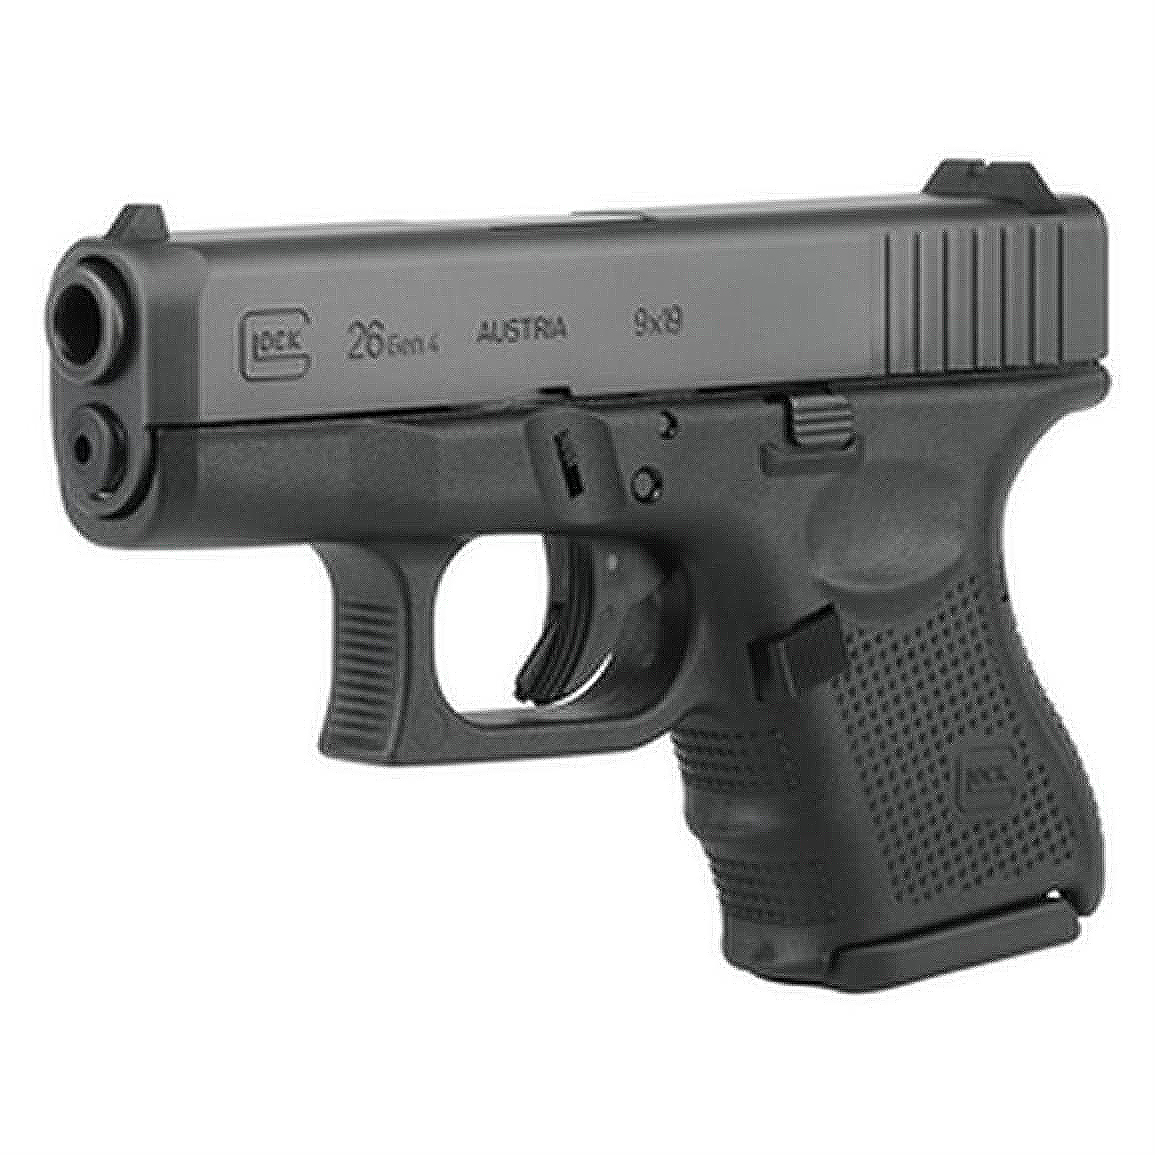 Glock 17 vs 19 vs 26 Compared [2021] - Here's Which One Is #1 And